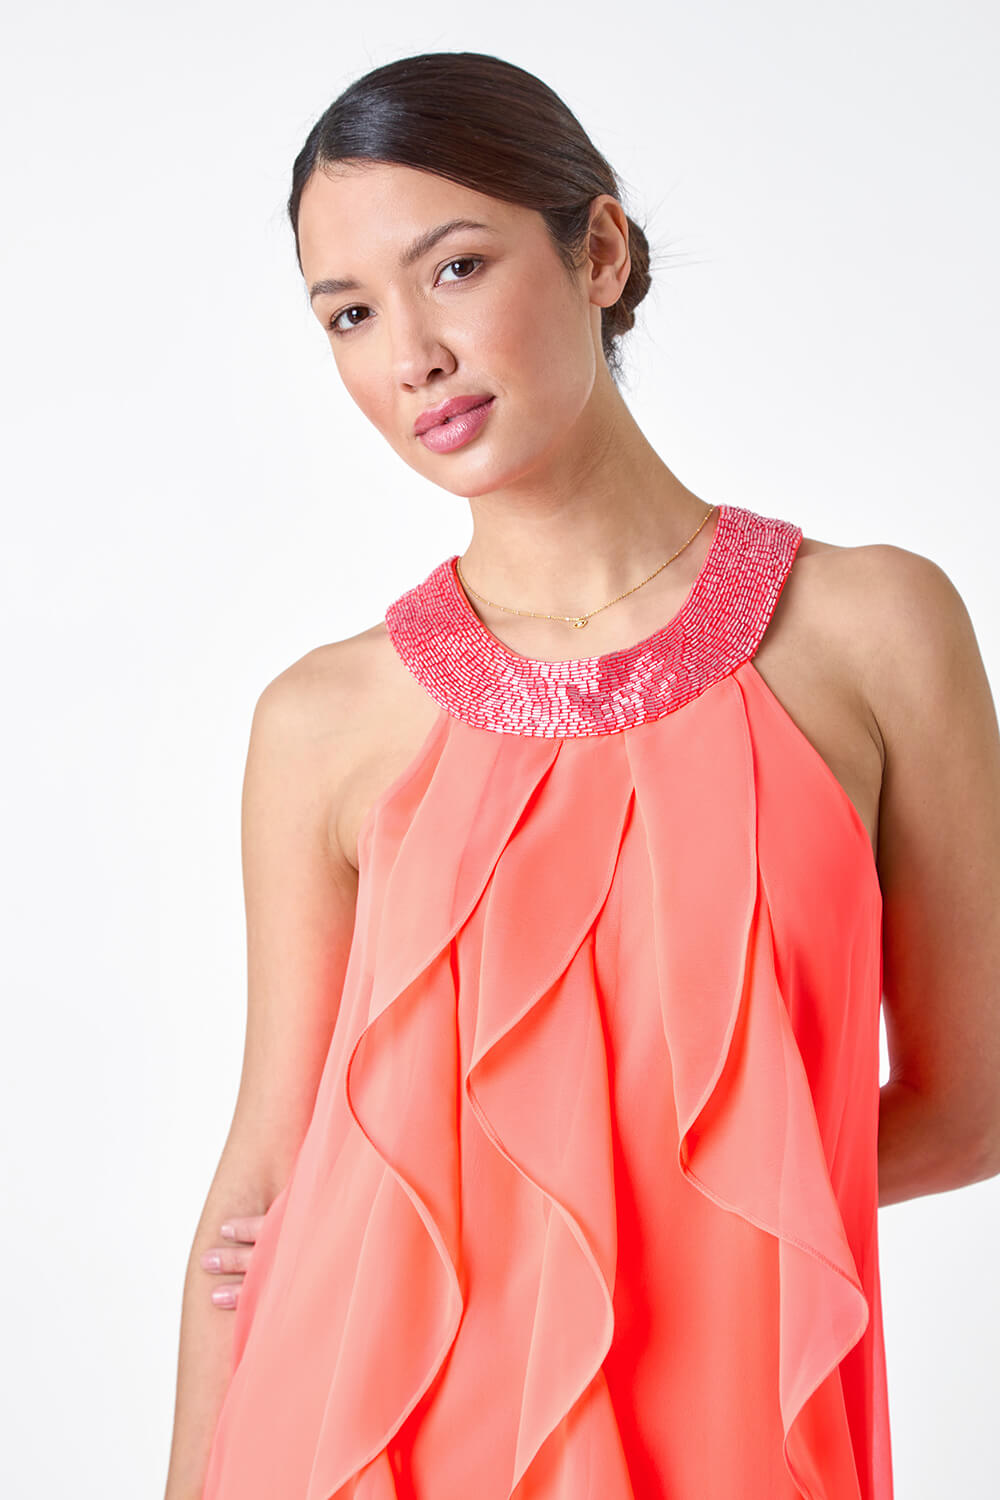 CORAL Embellished Collar Frilled Chiffon Dress, Image 4 of 5